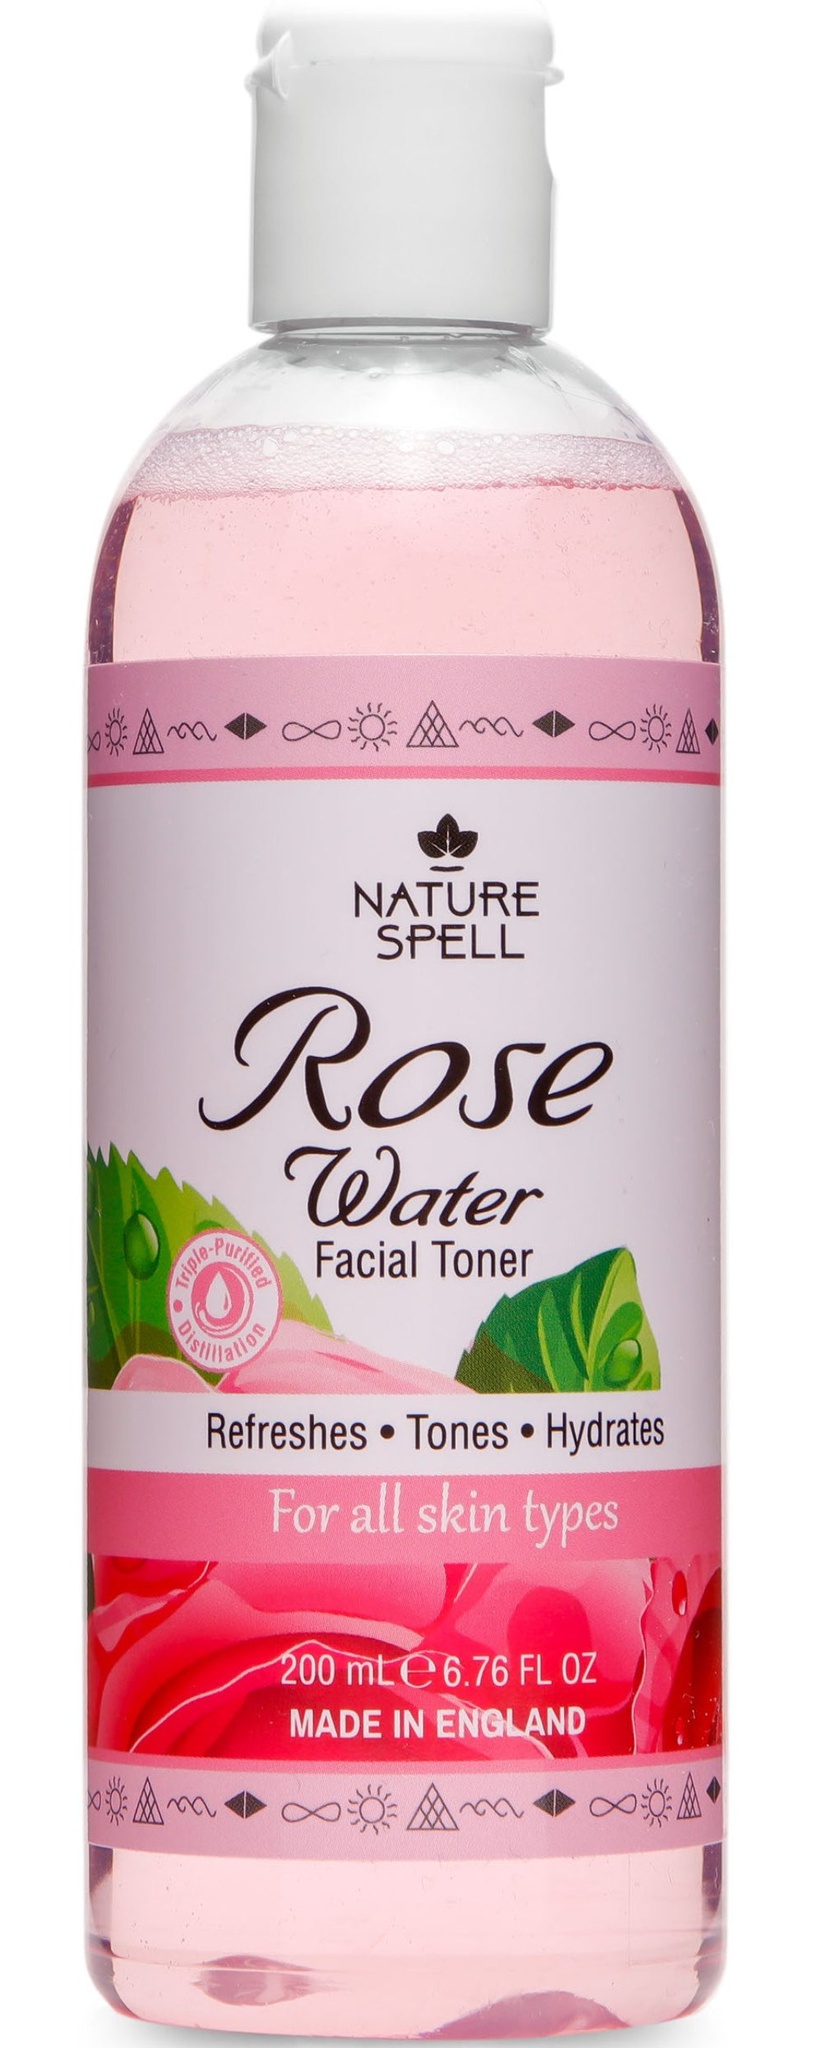 NATURE SPELL Rose Water Face Toner